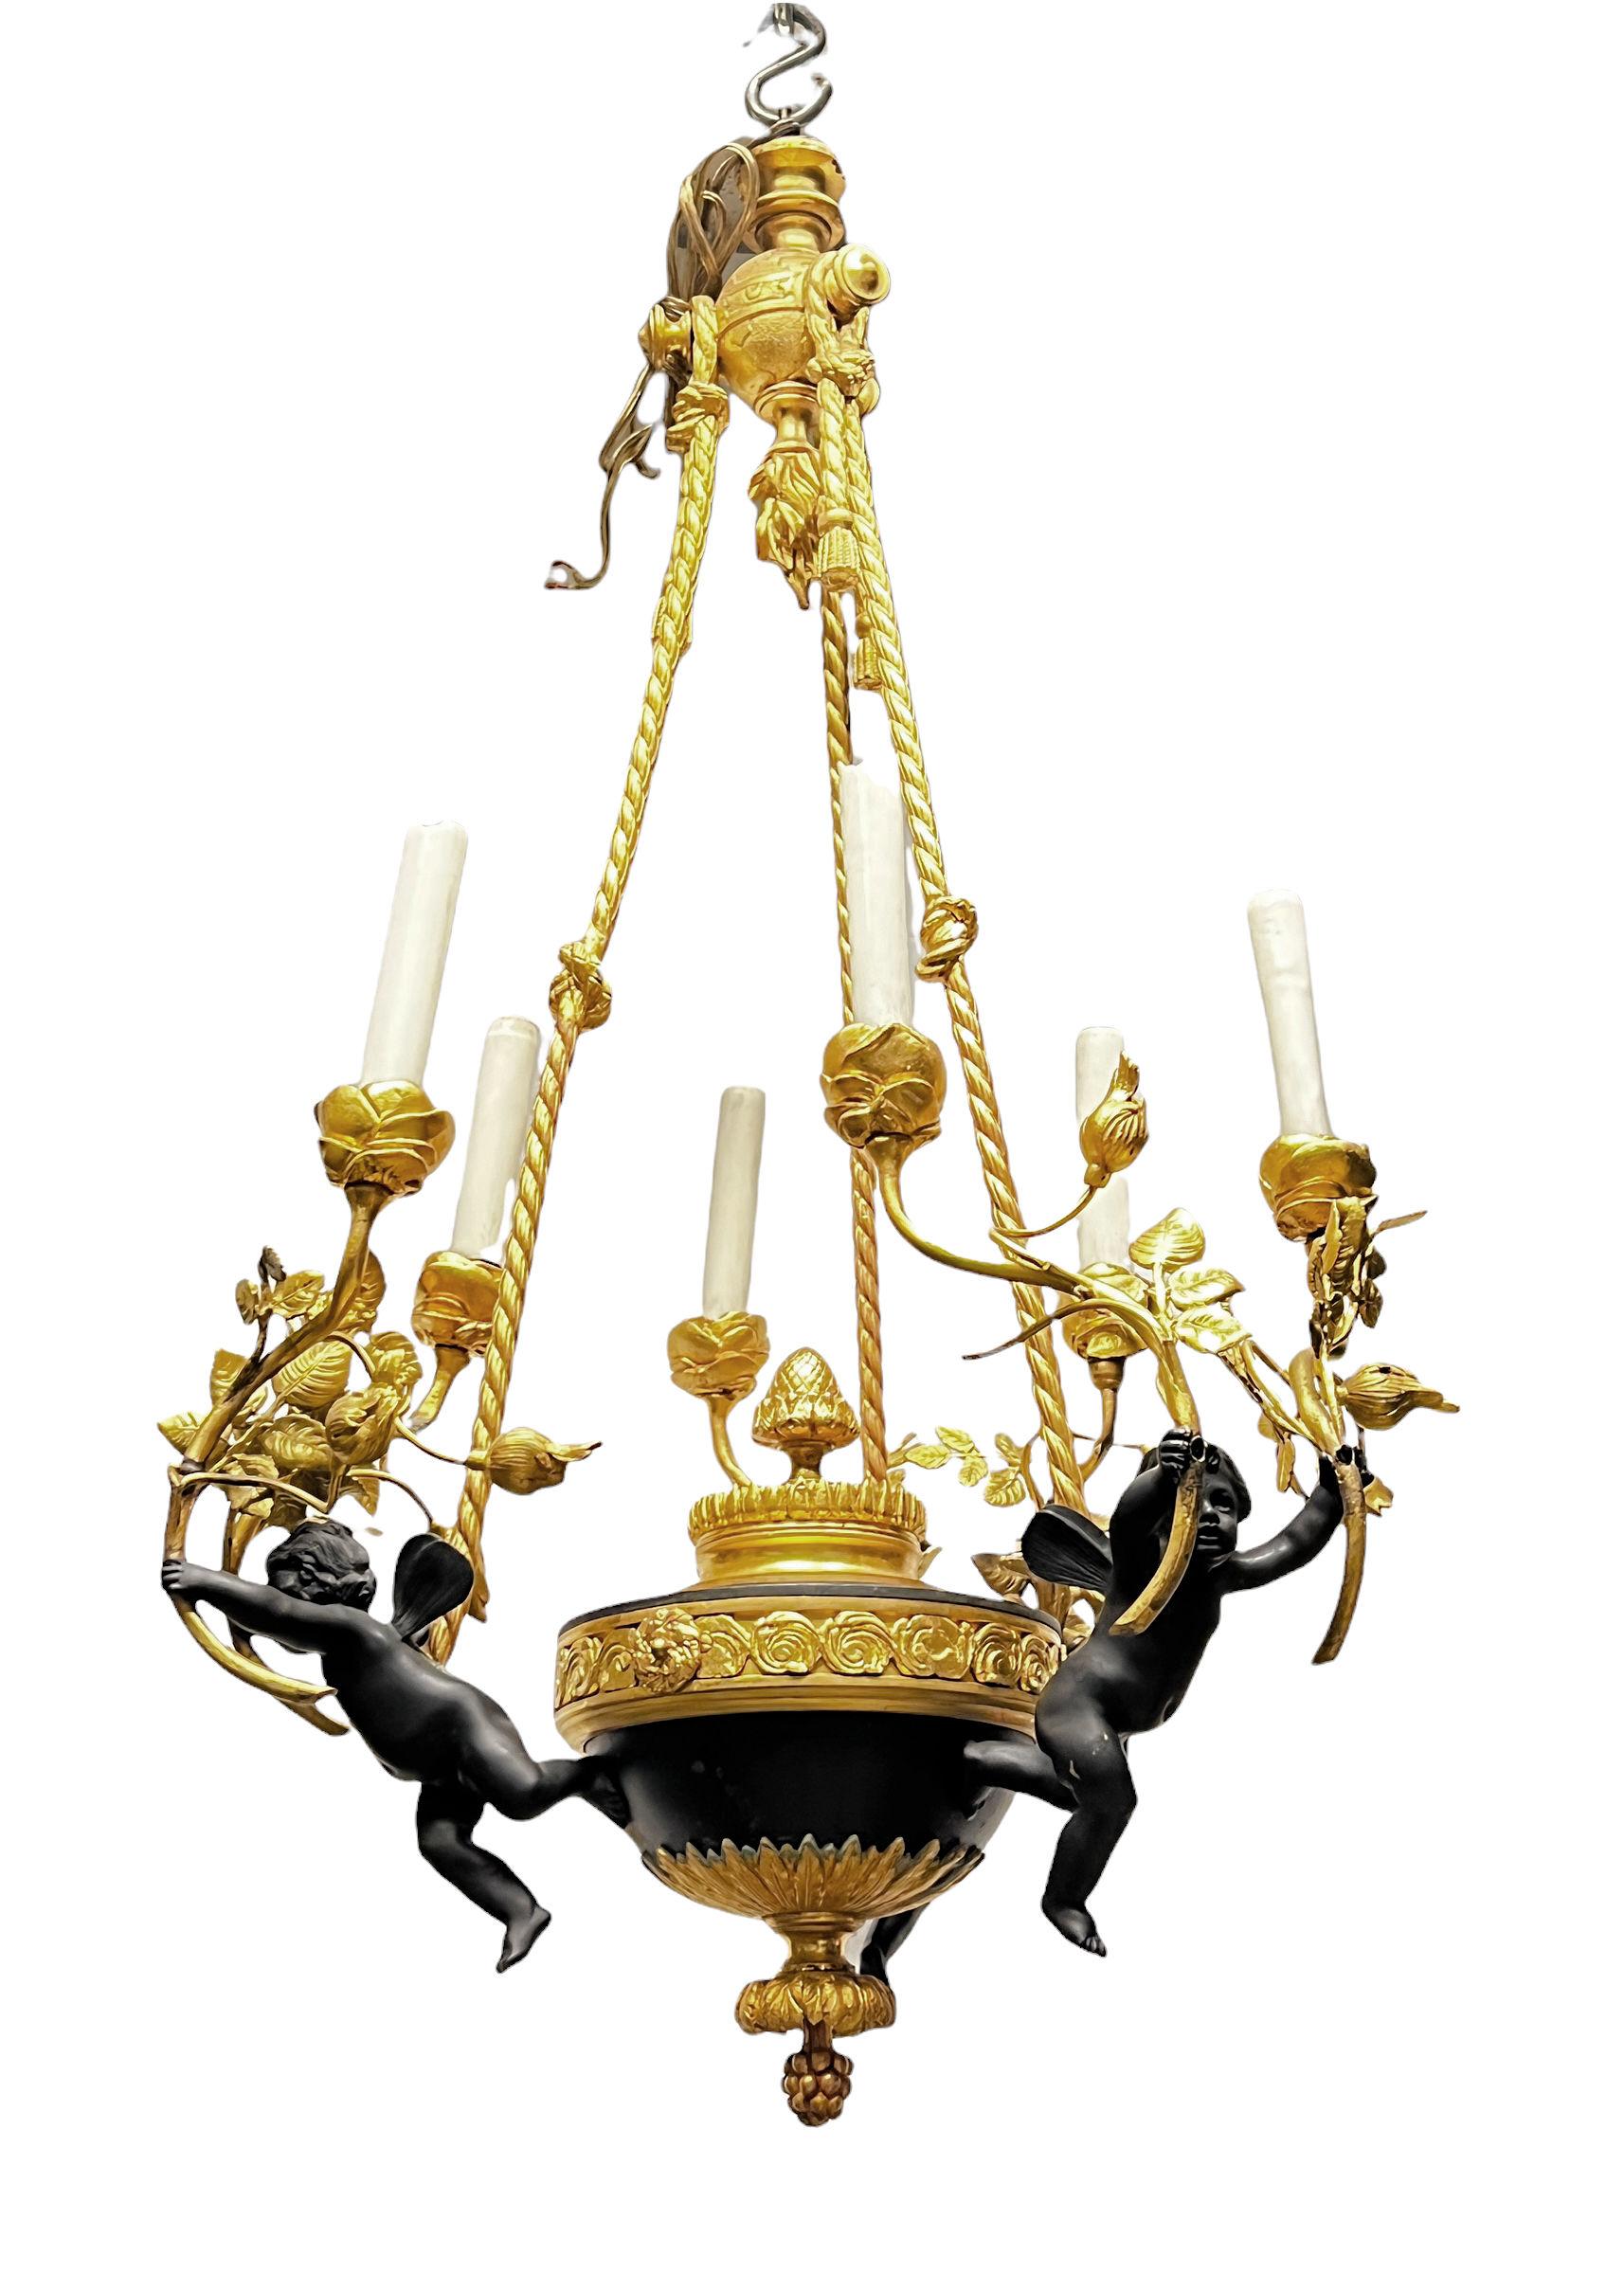 Early 20th Century French Louis XVI Style Patinated Bronze Six-Light Putti Motif Chandelier For Sale